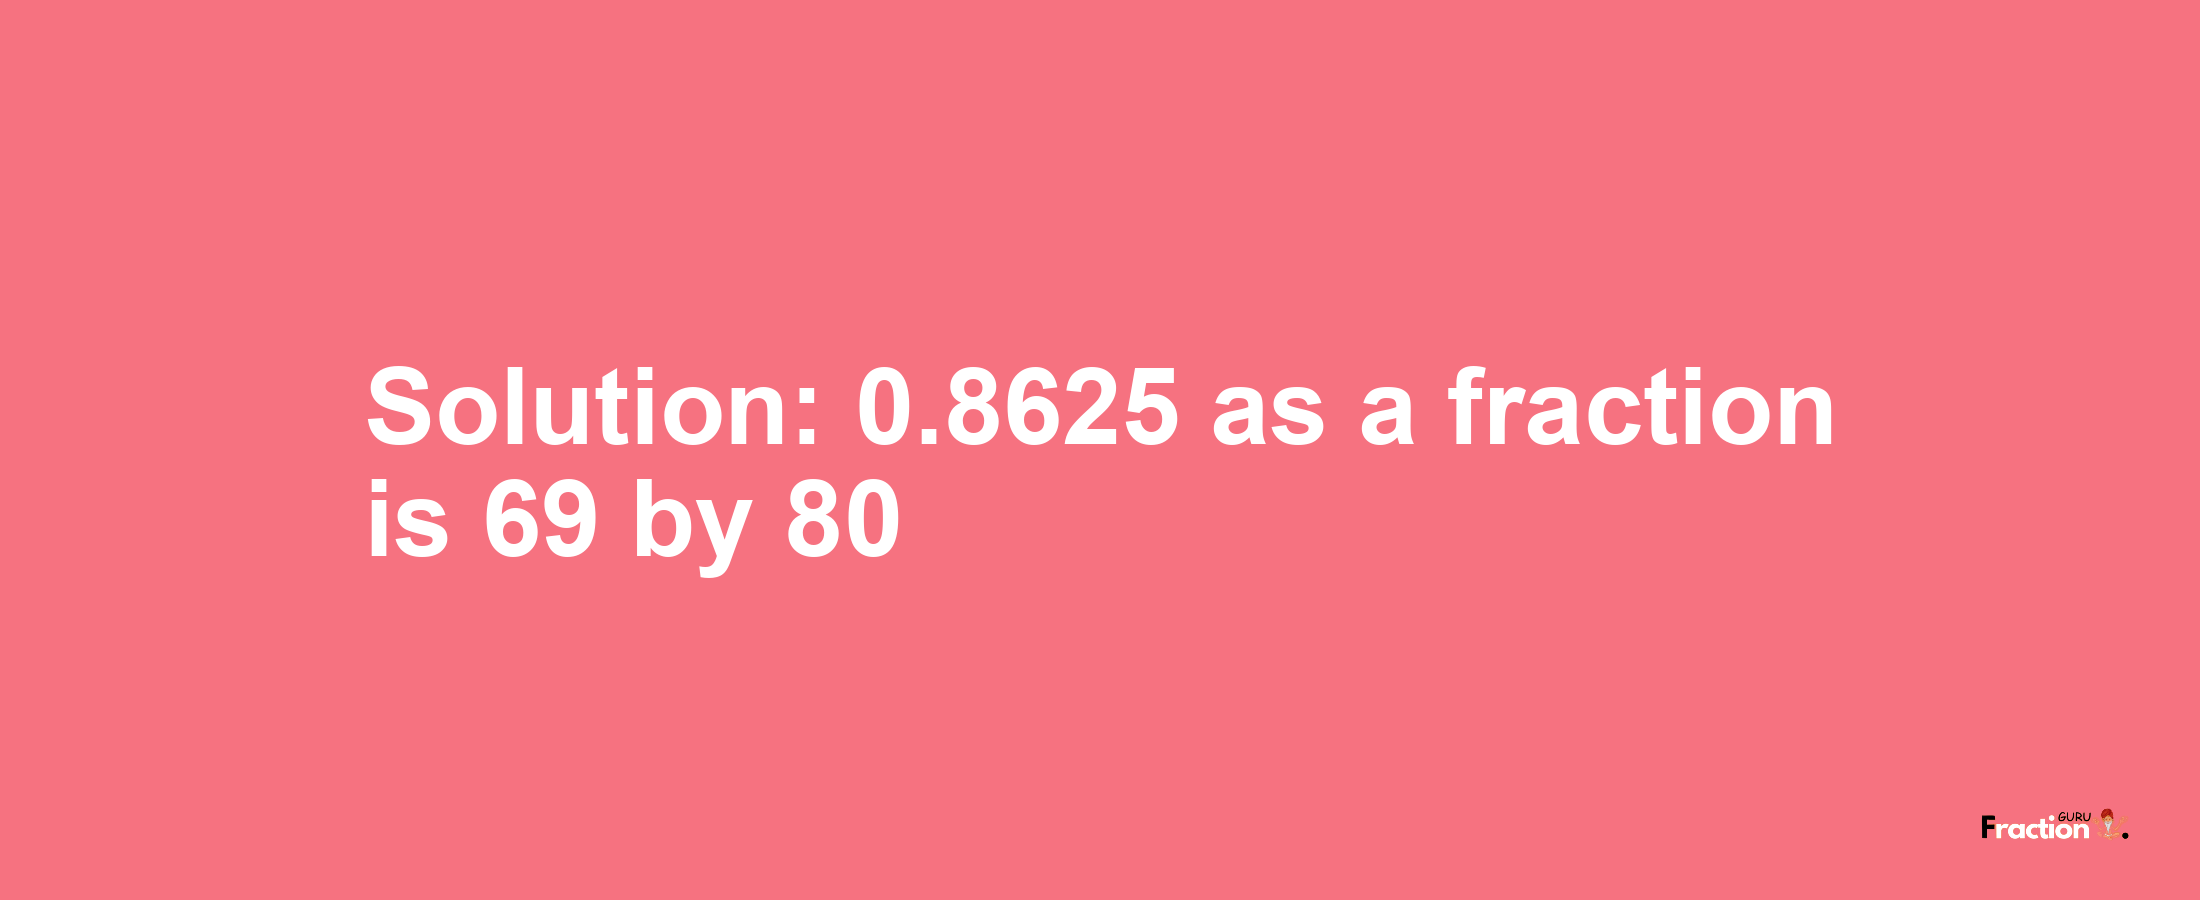 Solution:0.8625 as a fraction is 69/80